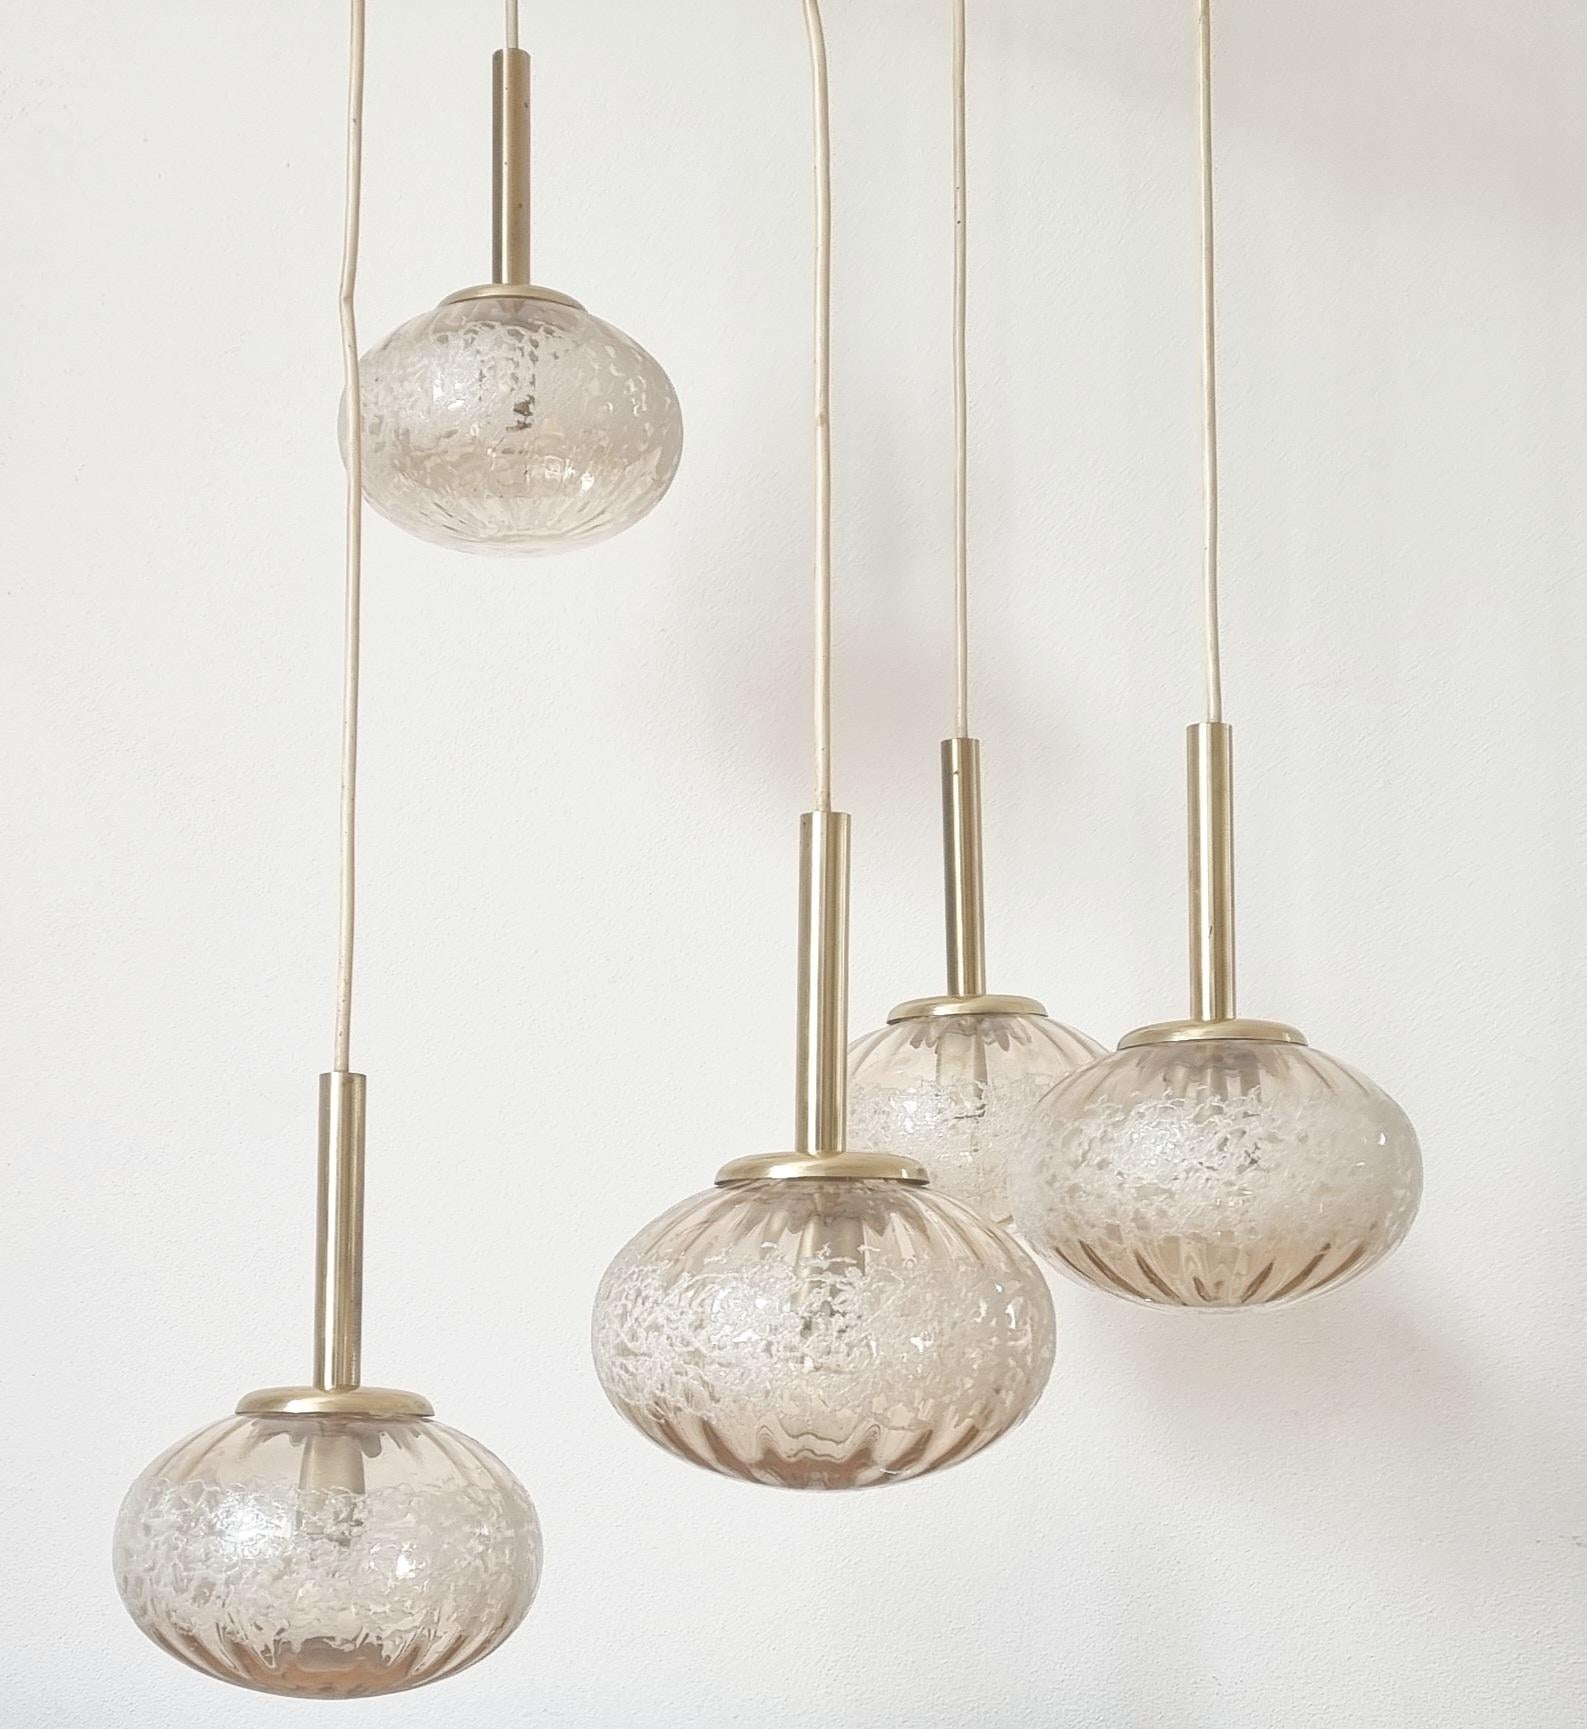 - very nice style of lighting
- rare type
- marked by label
- one large cascade pendant or five pendants with diameter 16 cm.